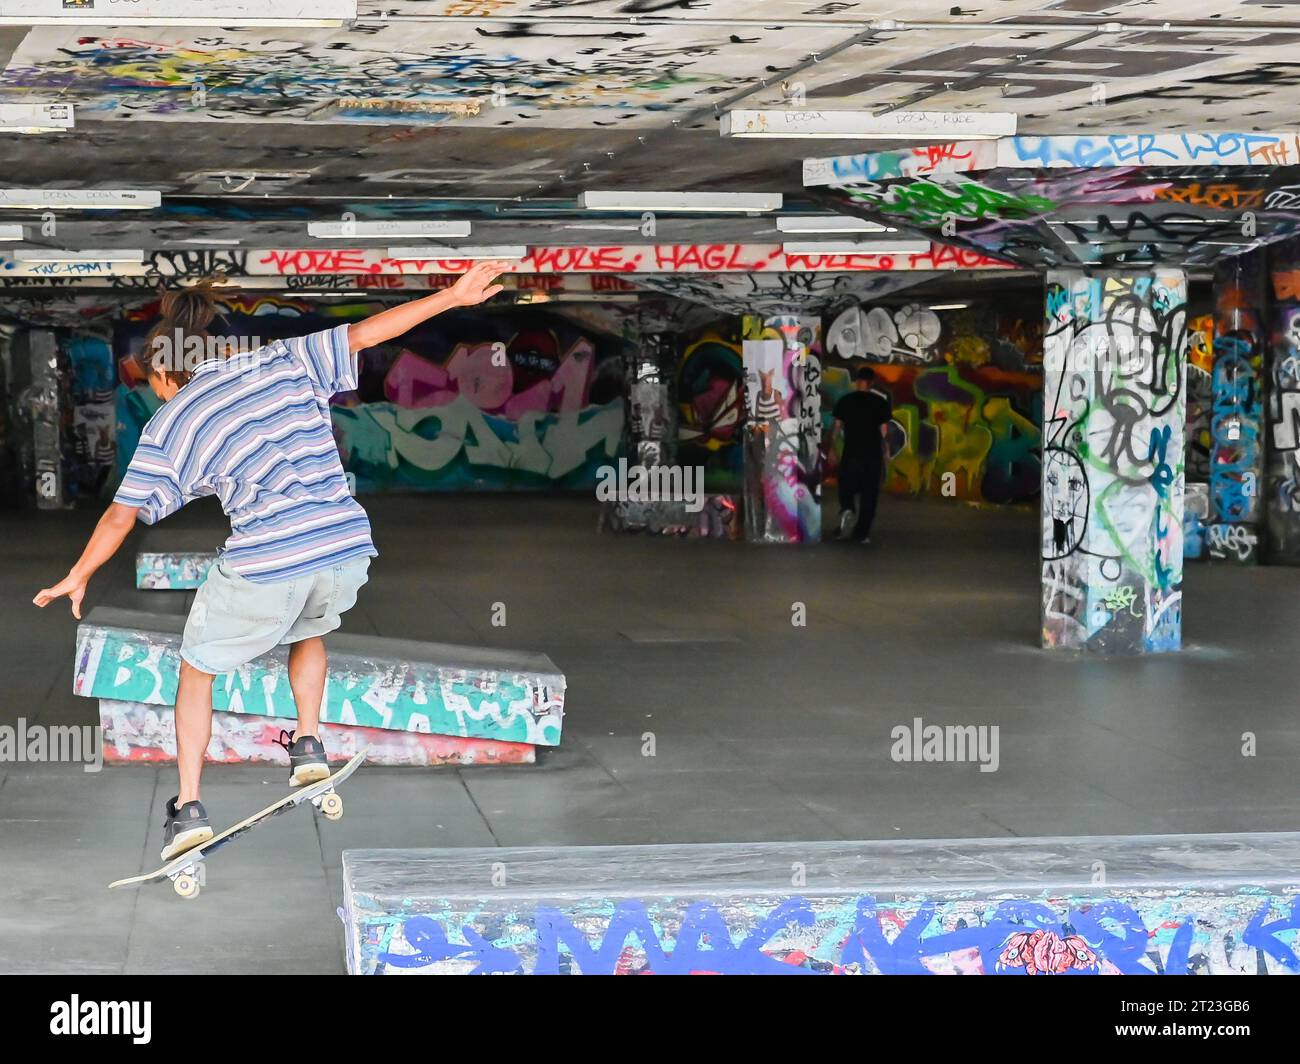 Young British skateboarder skating at London Southbank Skate Space, an urban culture landmark used by skateboarders Stock Photo